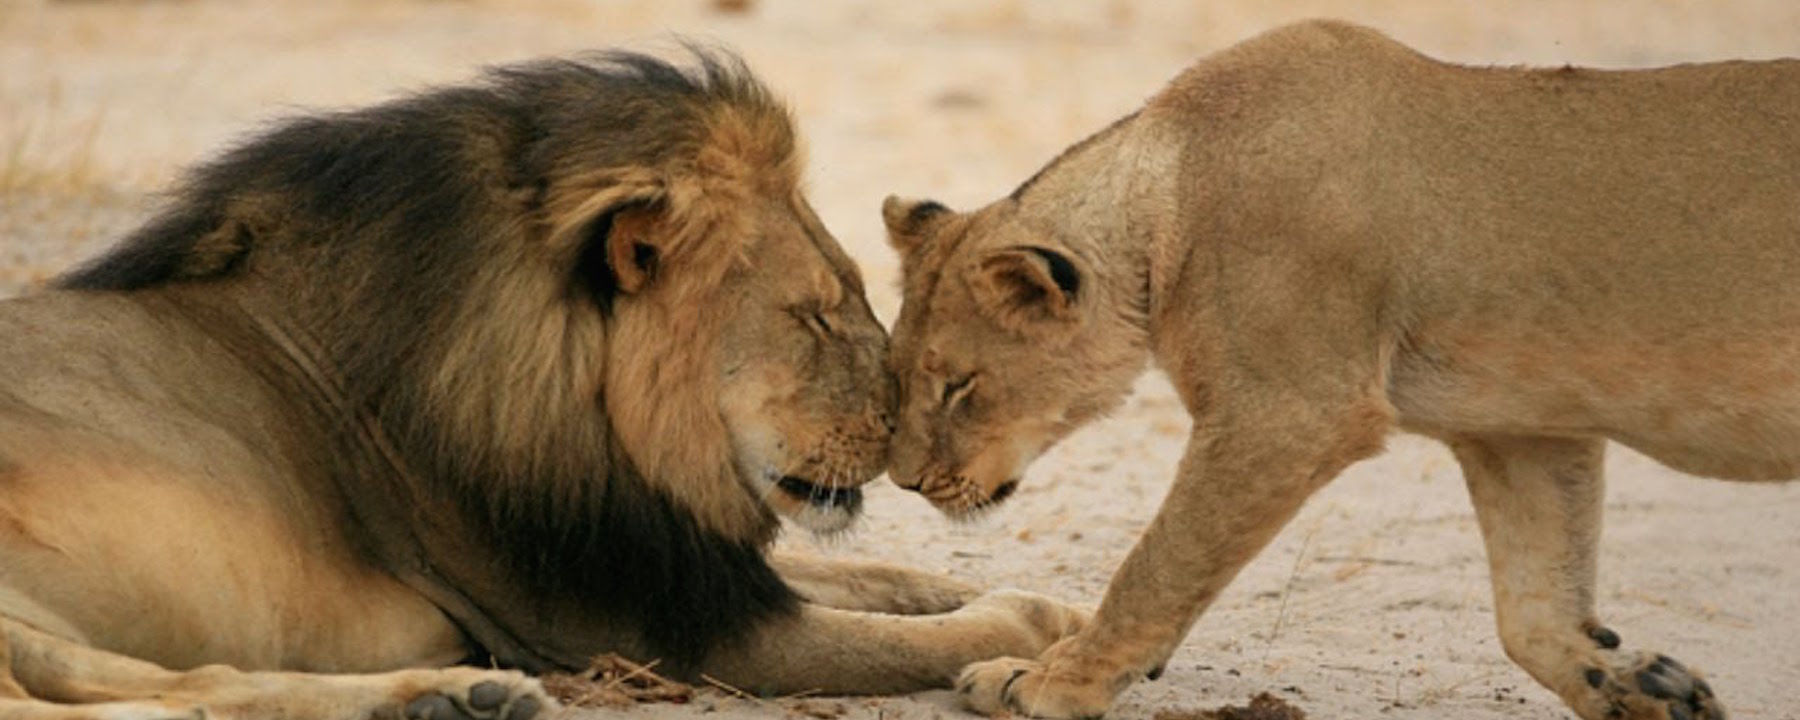 Read more about the article Use Your Voice on Social Media: Not Only for Cecil the Lion